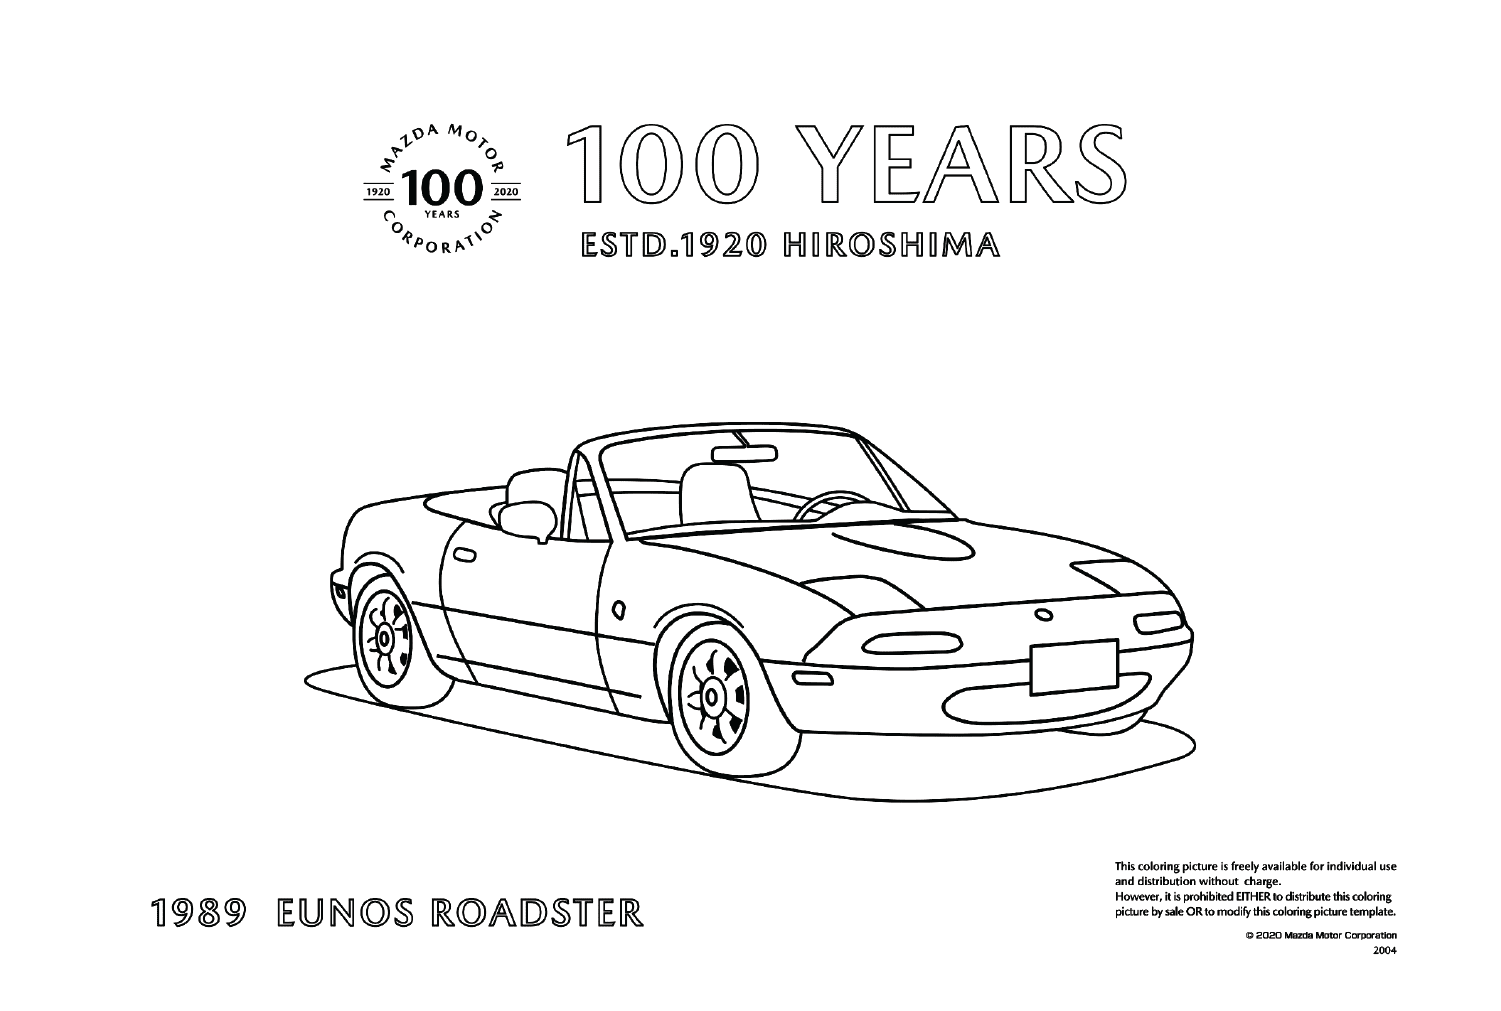 Mazda Eunos Roadster Coloring Page from Mazda